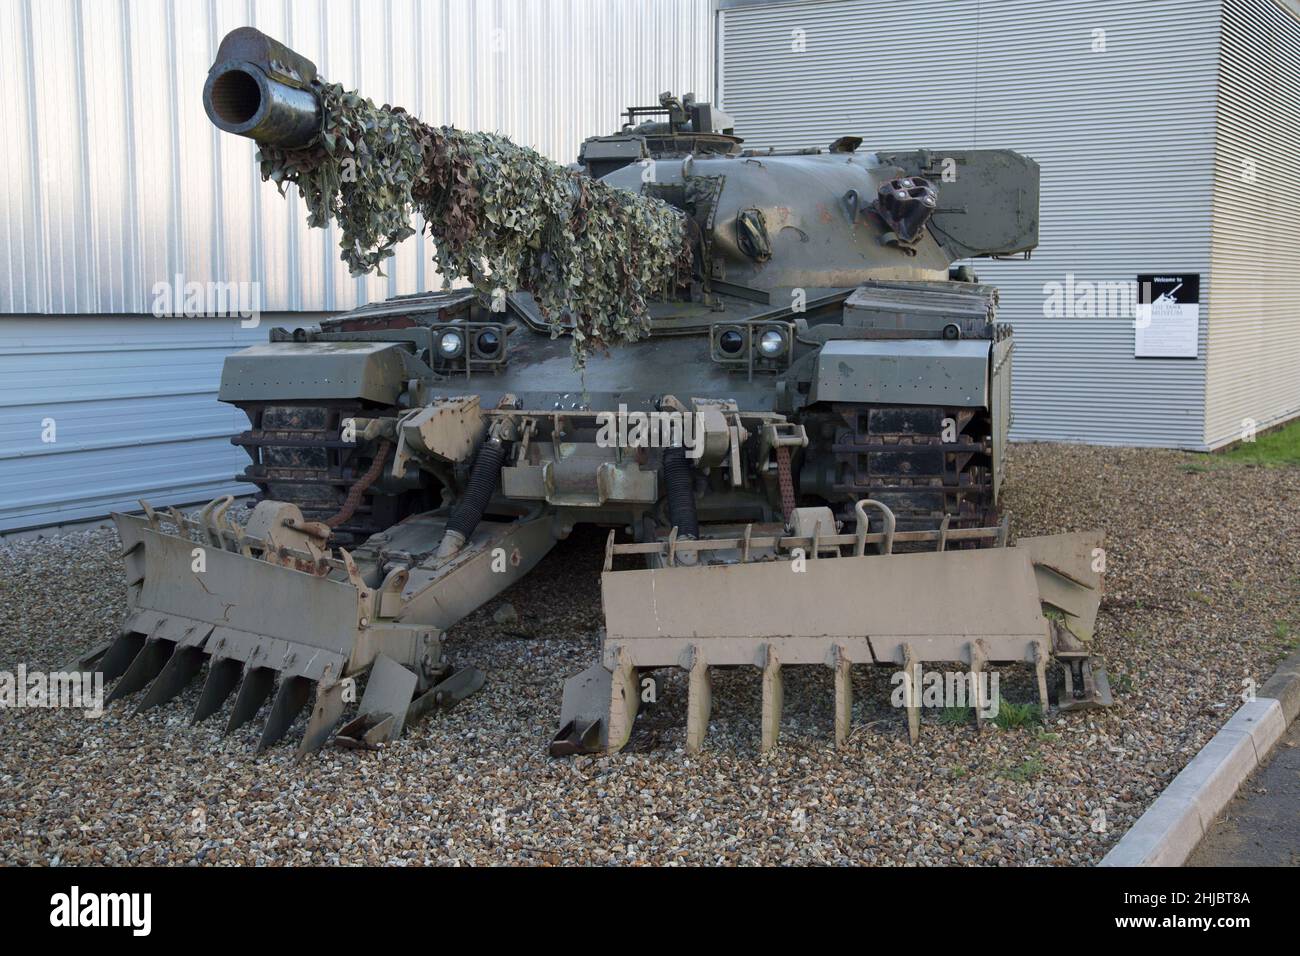 British army Chieftain Mark 5 main Battle Tank fitted with a Pearson Engineering Track Width Mineplough, Bovington Tank Museum, Dorset, England Stock Photo